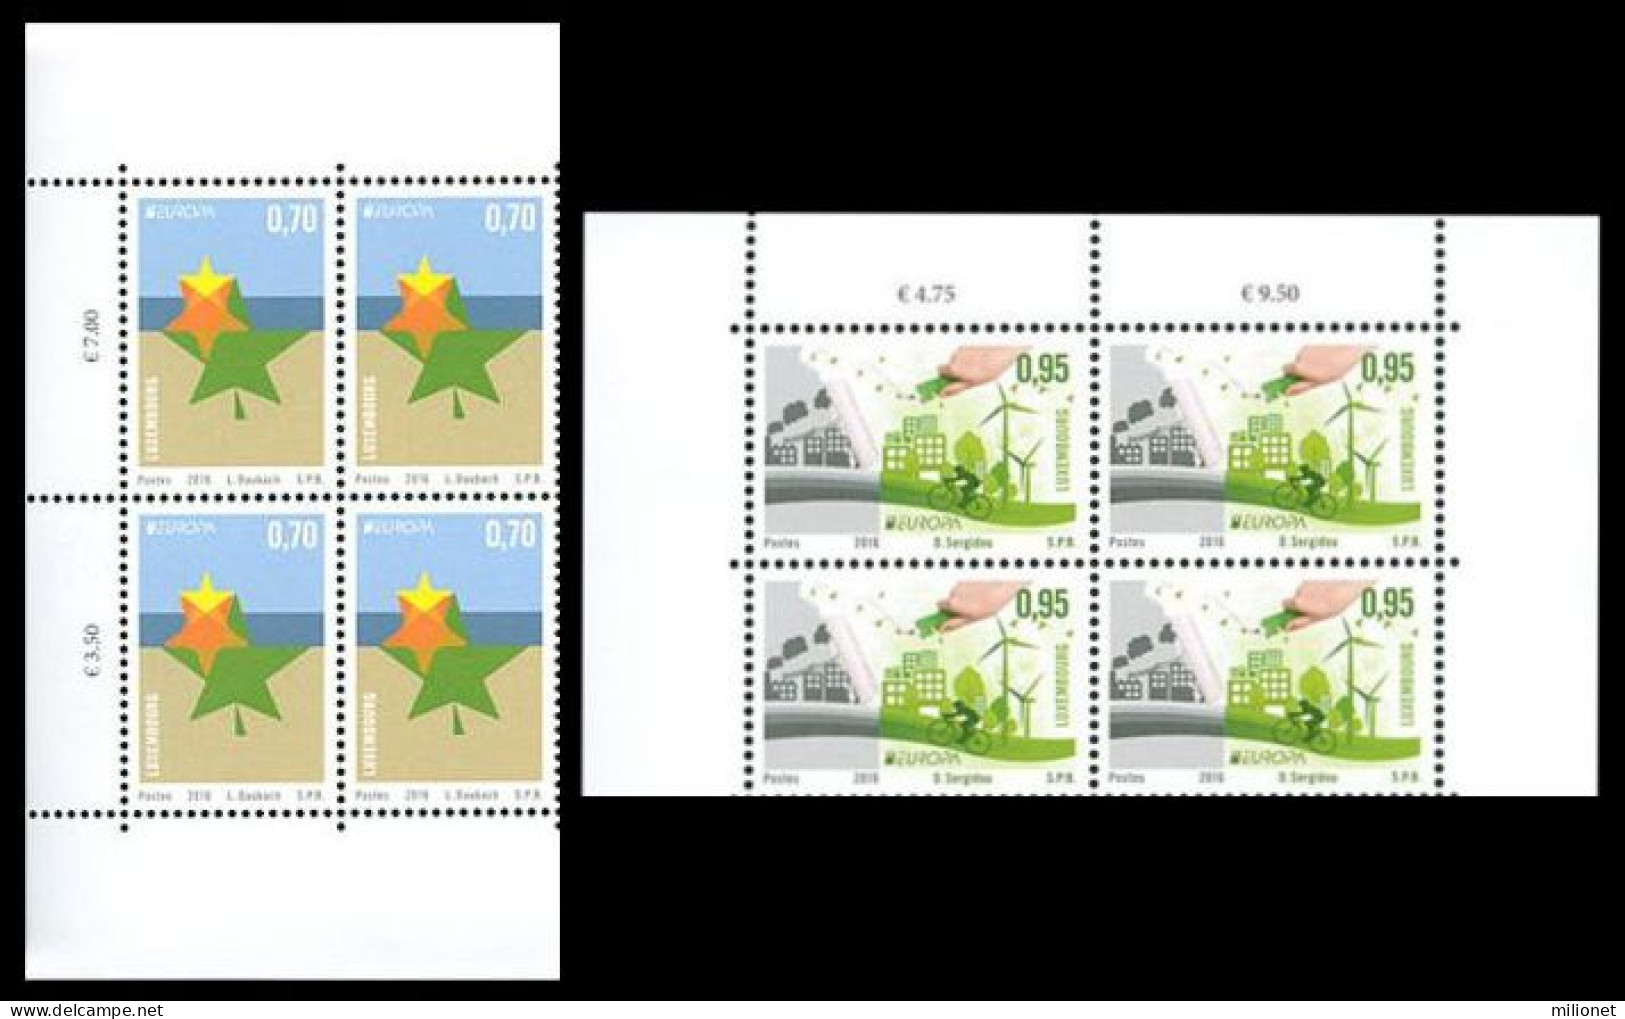 SALE!!! LUXEMBURGO LUXEMBOURG LUXEMBURG 2016 EUROPA CEPT Think Green 2 Blocks Of 4 Stamps MNH ** - 2016